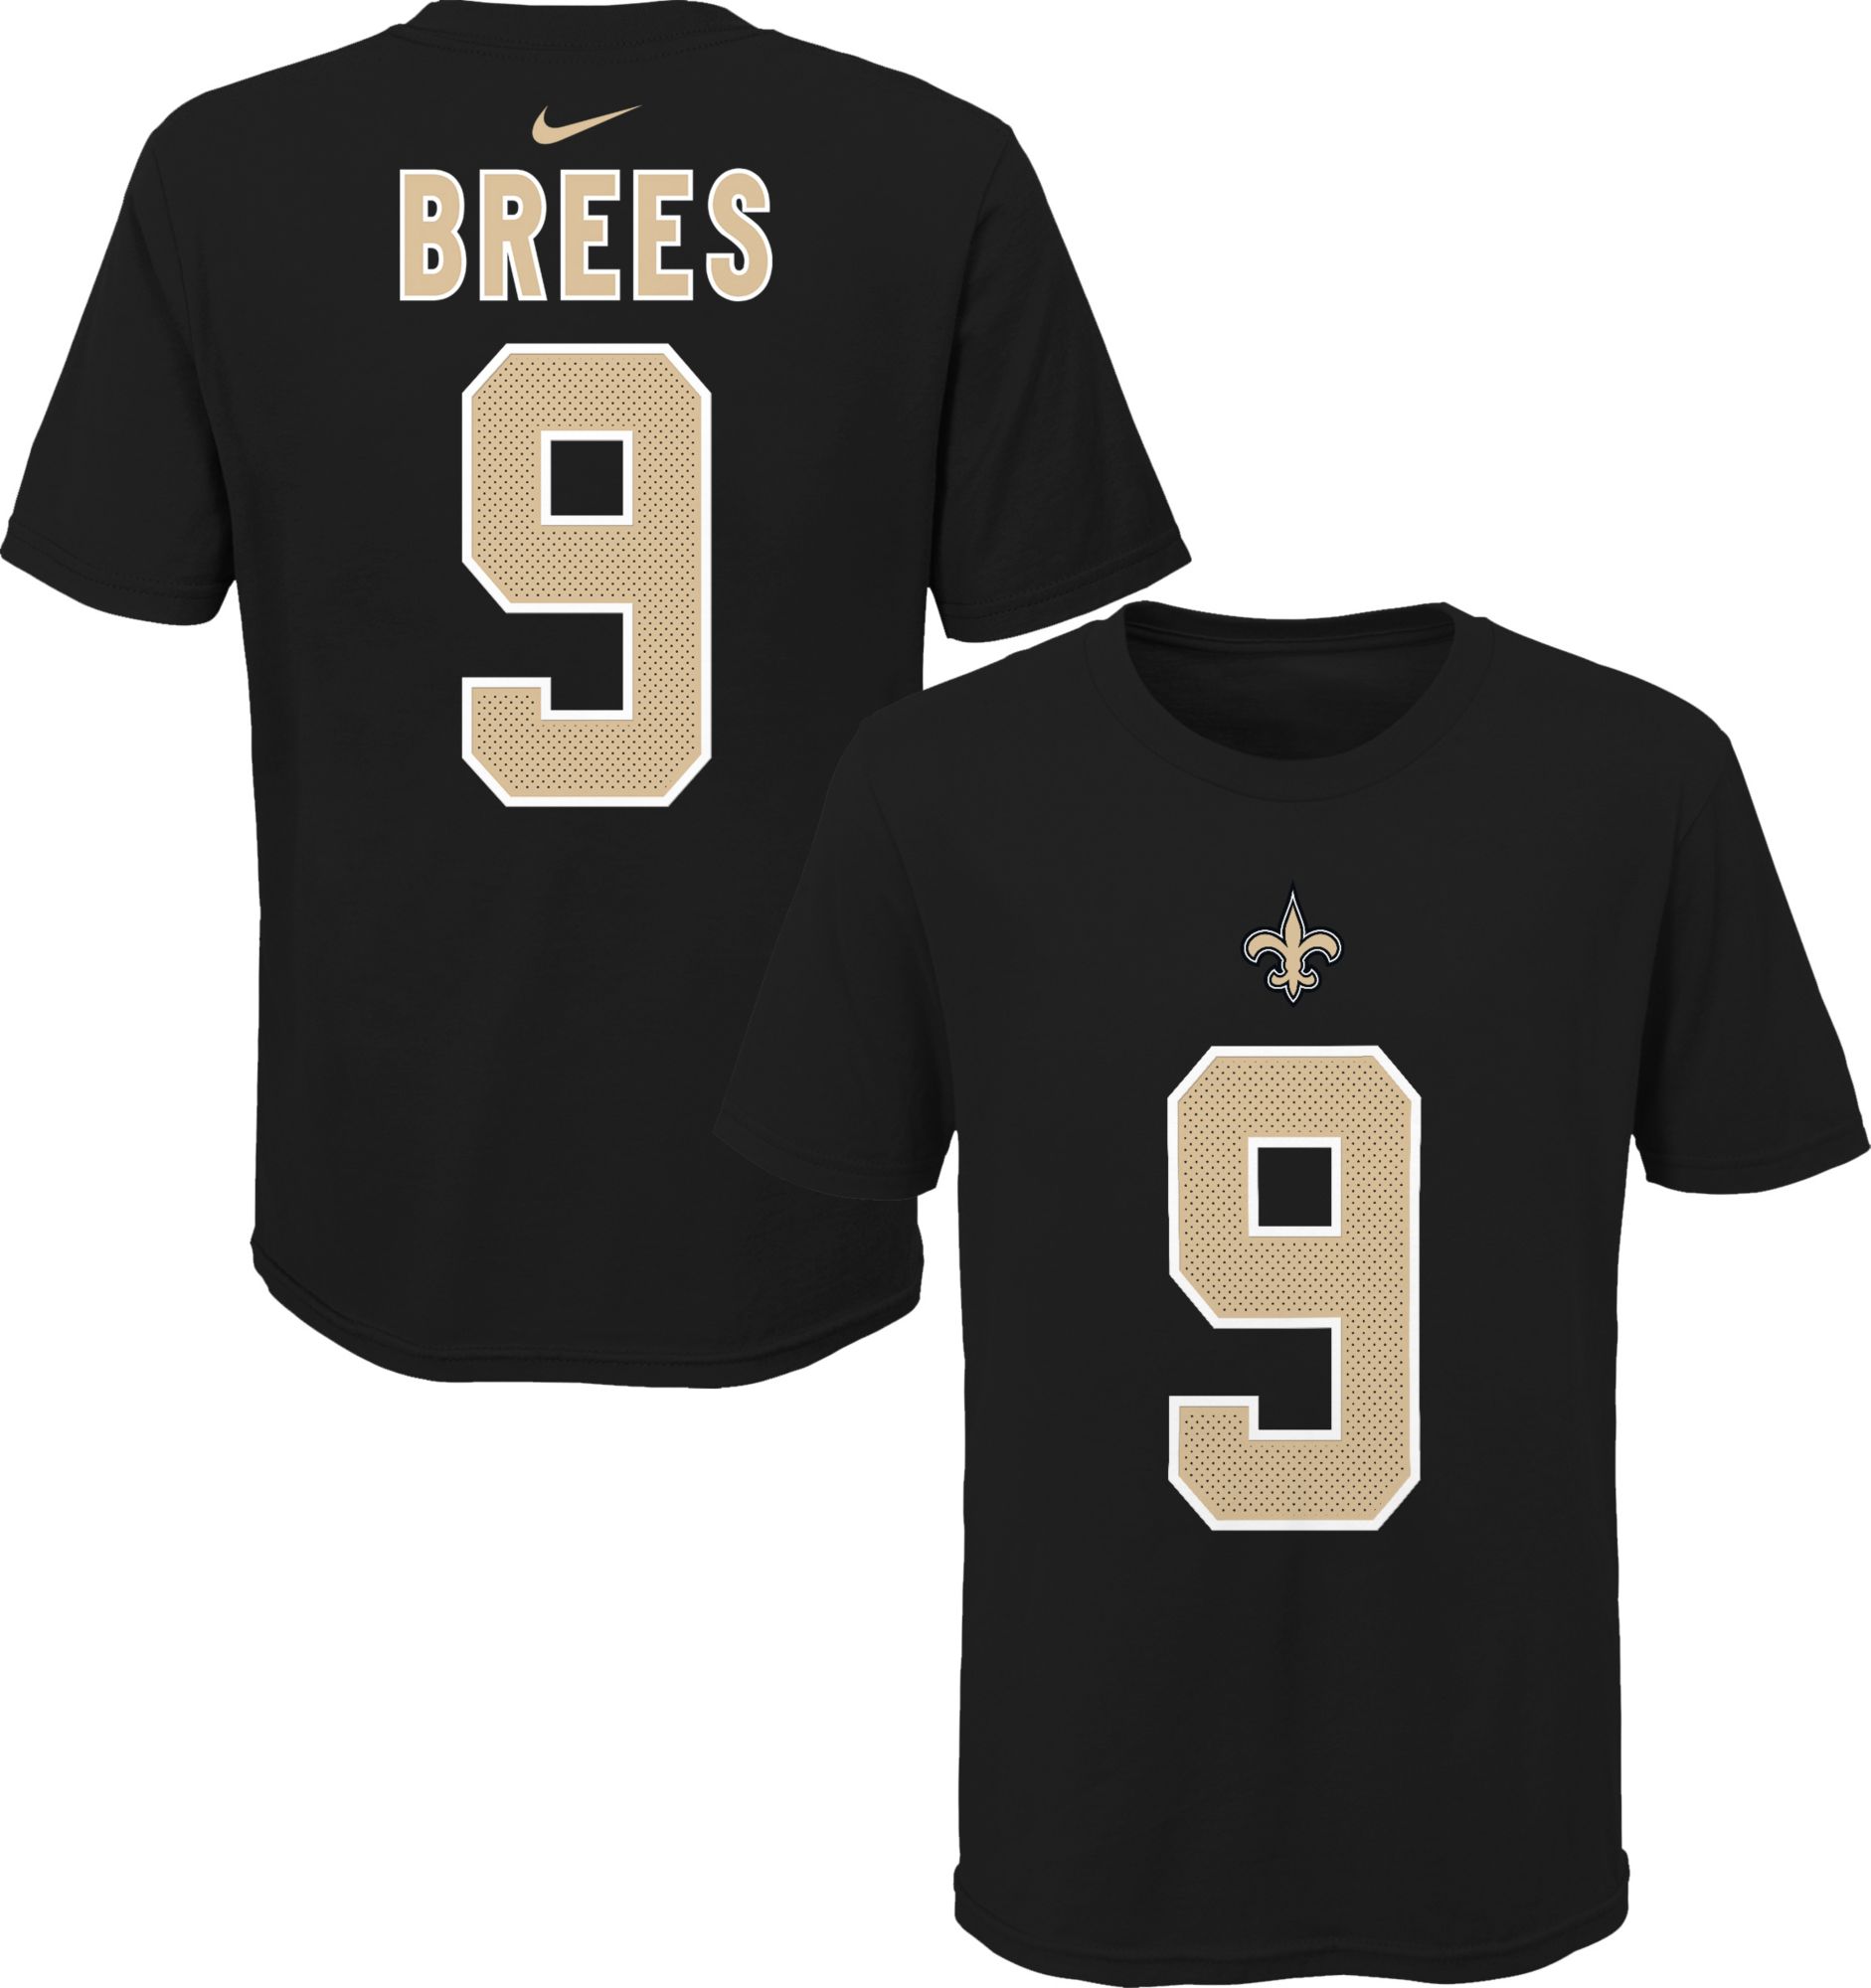 drew brees jersey youth